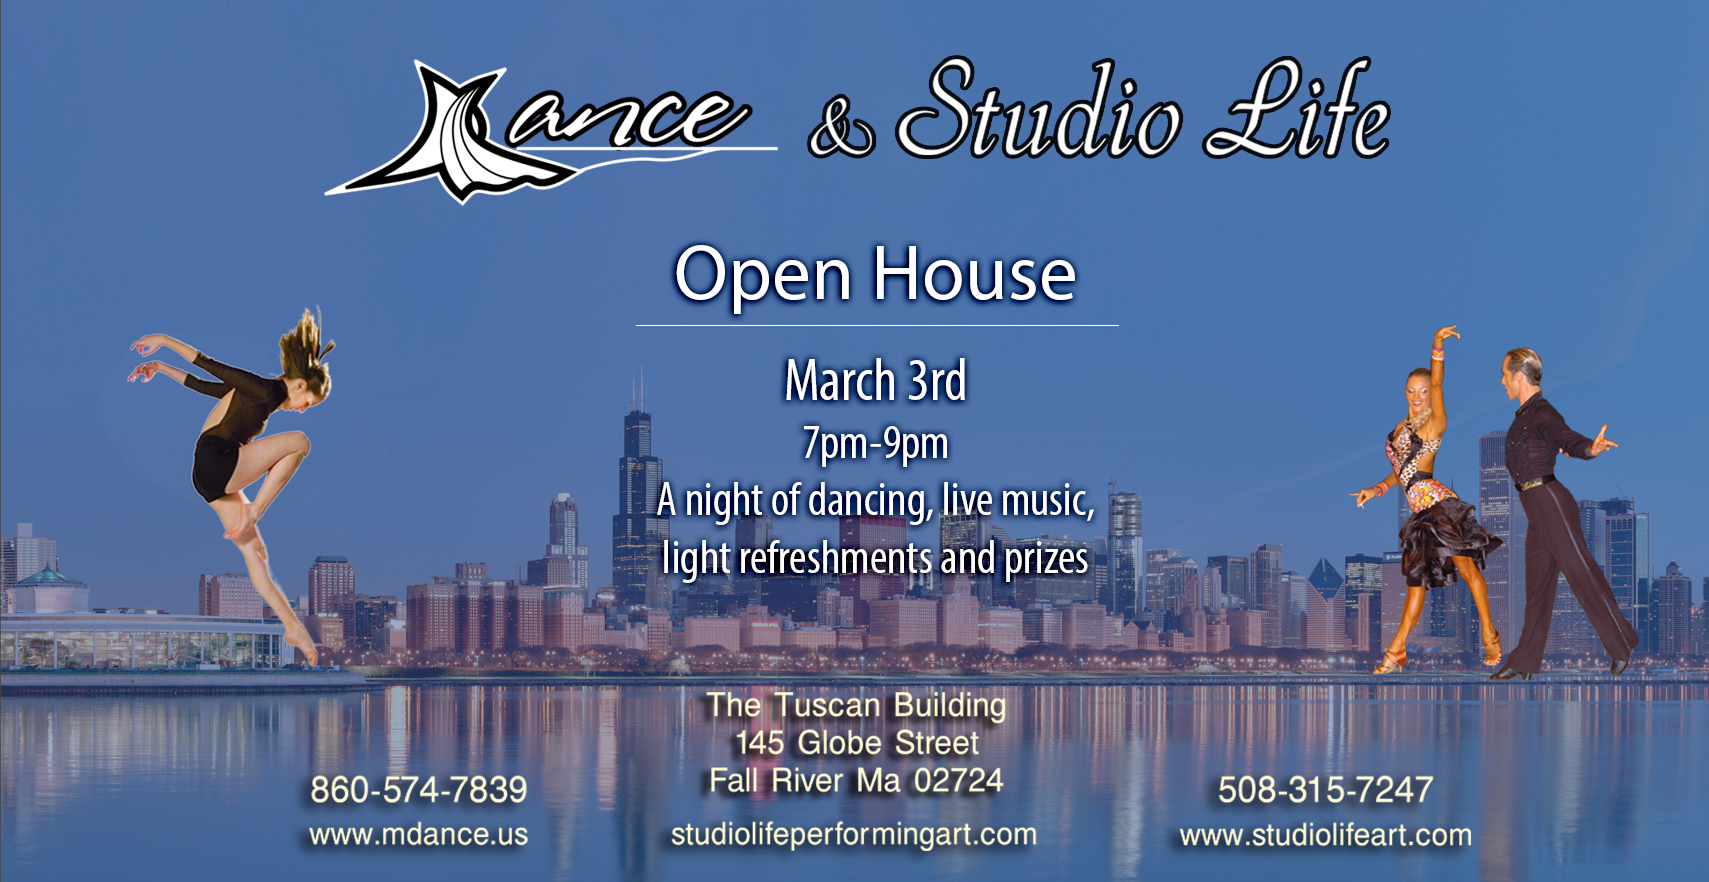 M Dance Studio events March 3rd Open House